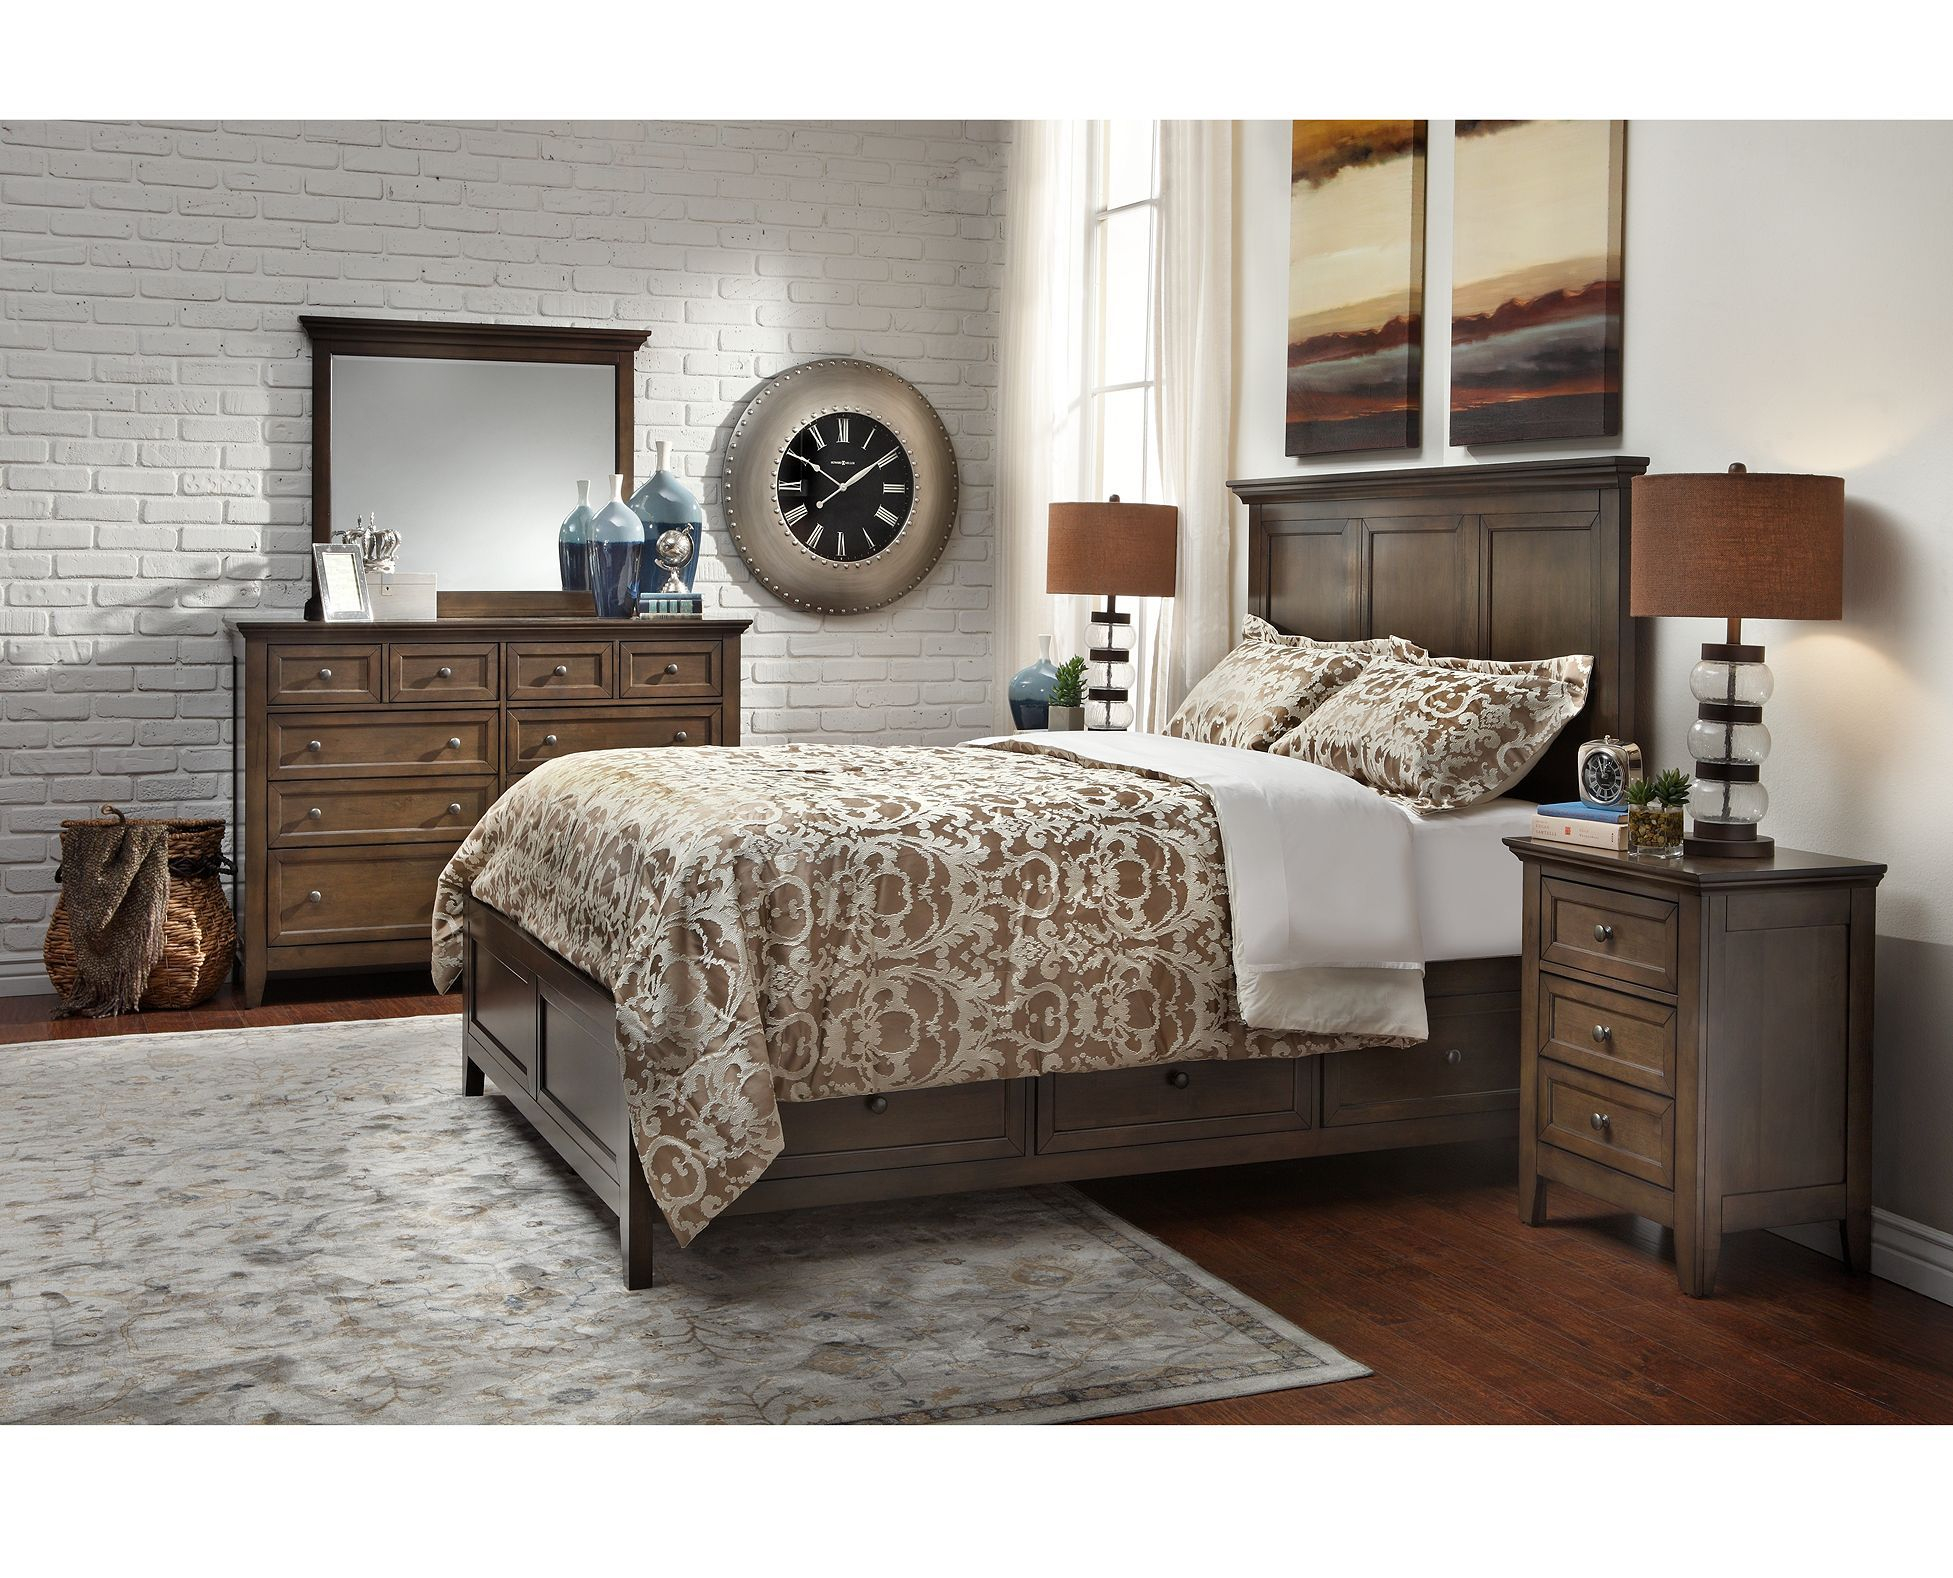 Bering Panel Bedroom Set Bedroom Bedroom Decor For Couples pertaining to dimensions 1953 X 1578